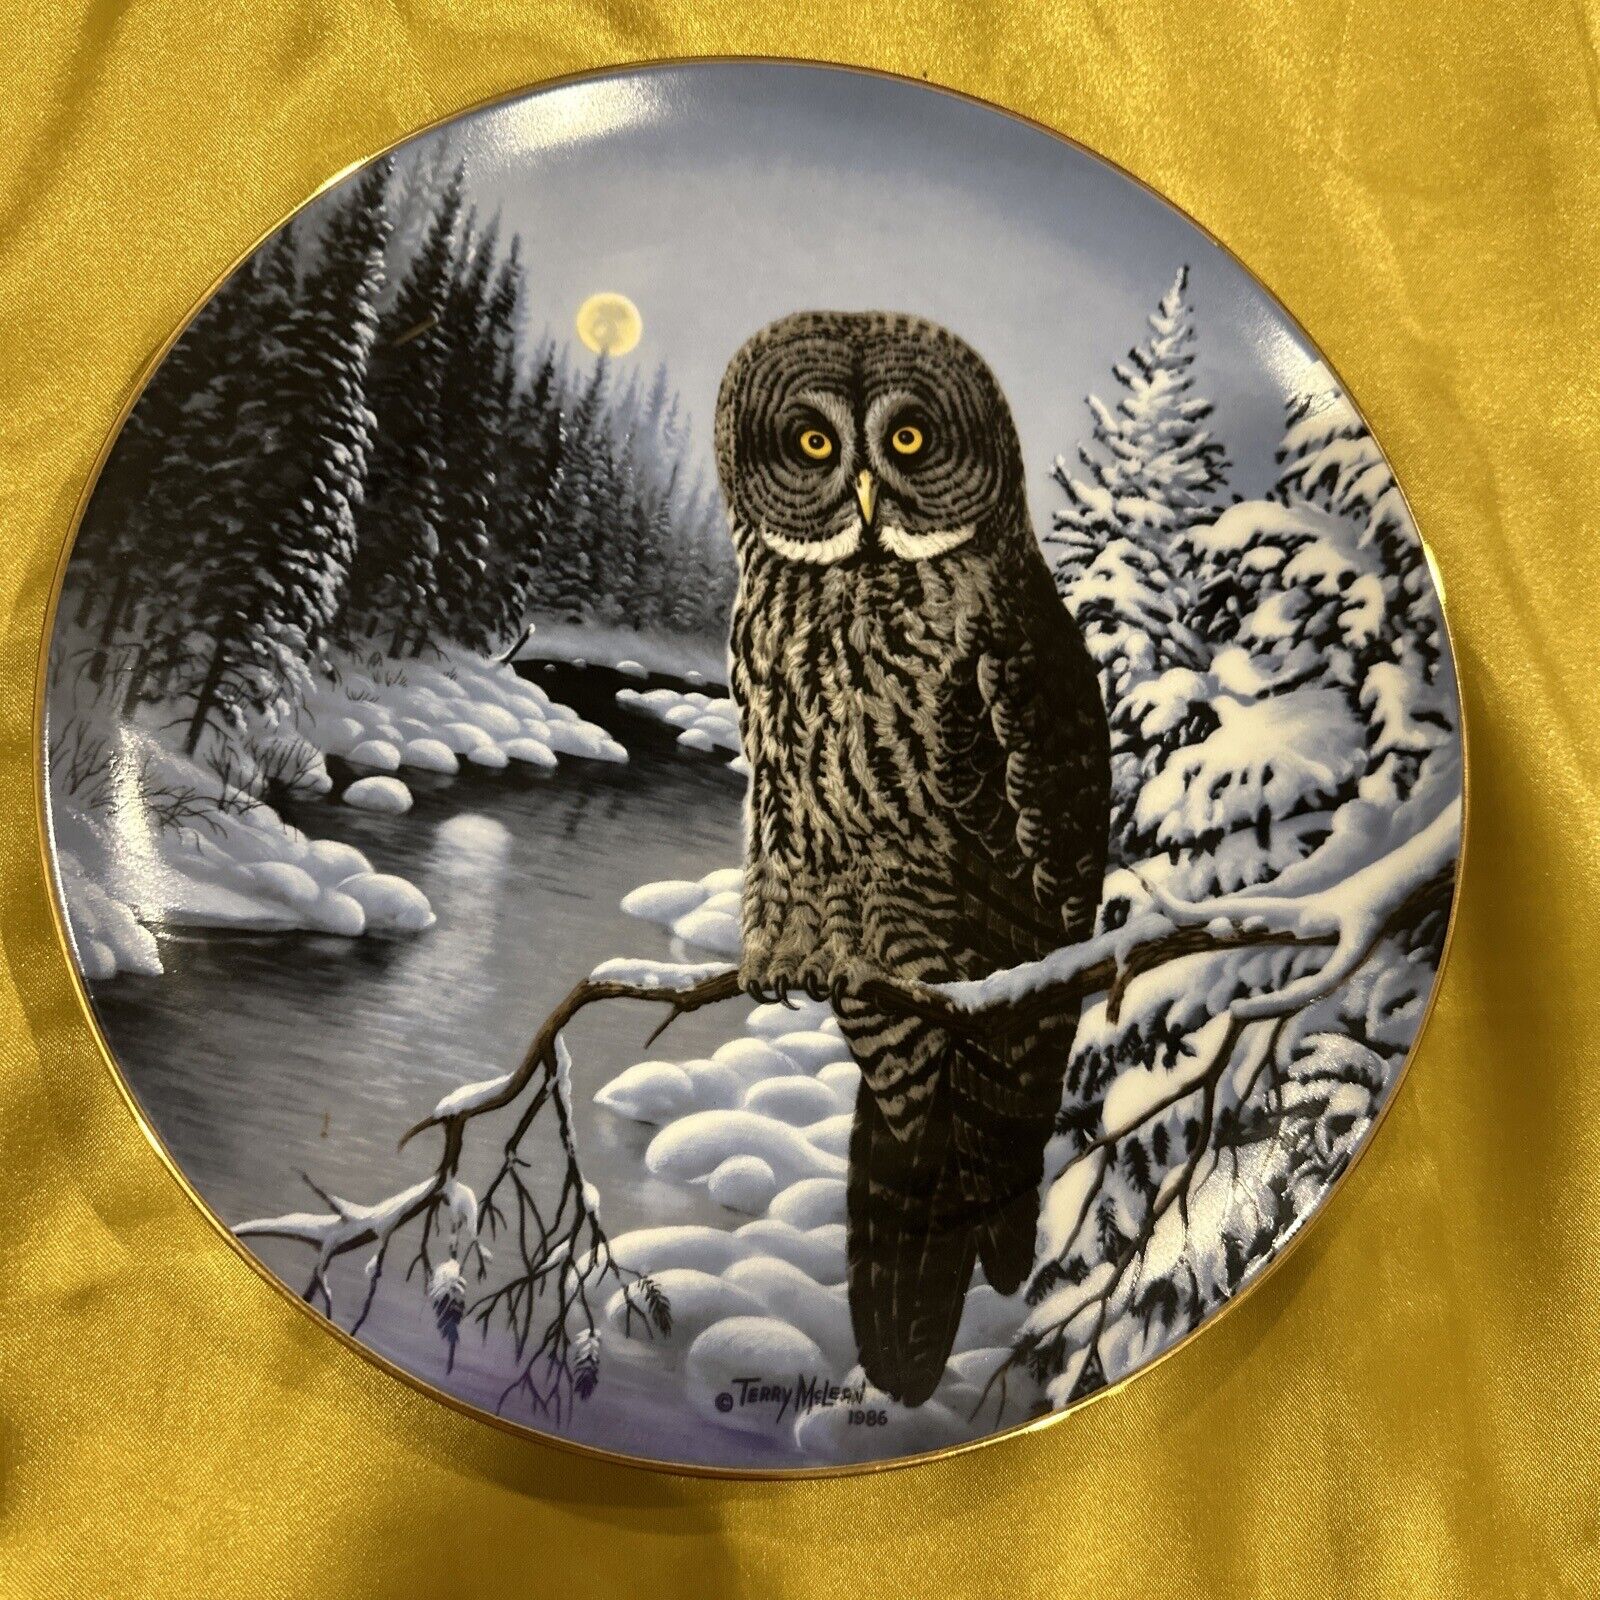 RARE Phantom Of The North Manitoba's Great Gray Owl By Terry McLean 4159/5000